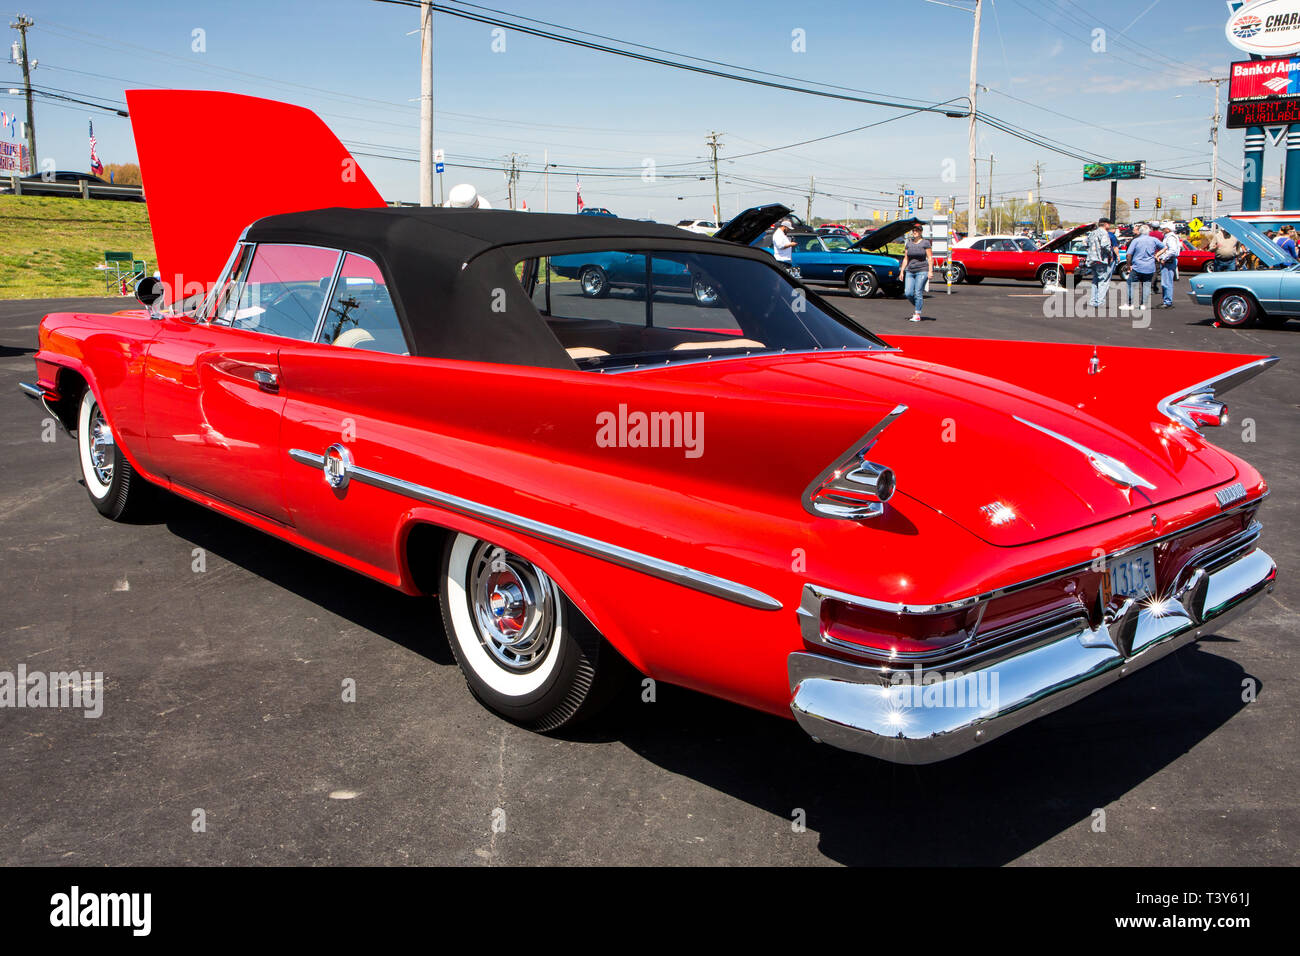 CONCORD, NC (USA) - April 6, 2019:  A 1961 Chrysler 300 G automobile on display at the Pennzoil AutoFair Classic Car Show at Charlotte Motor Speedway. Stock Photo